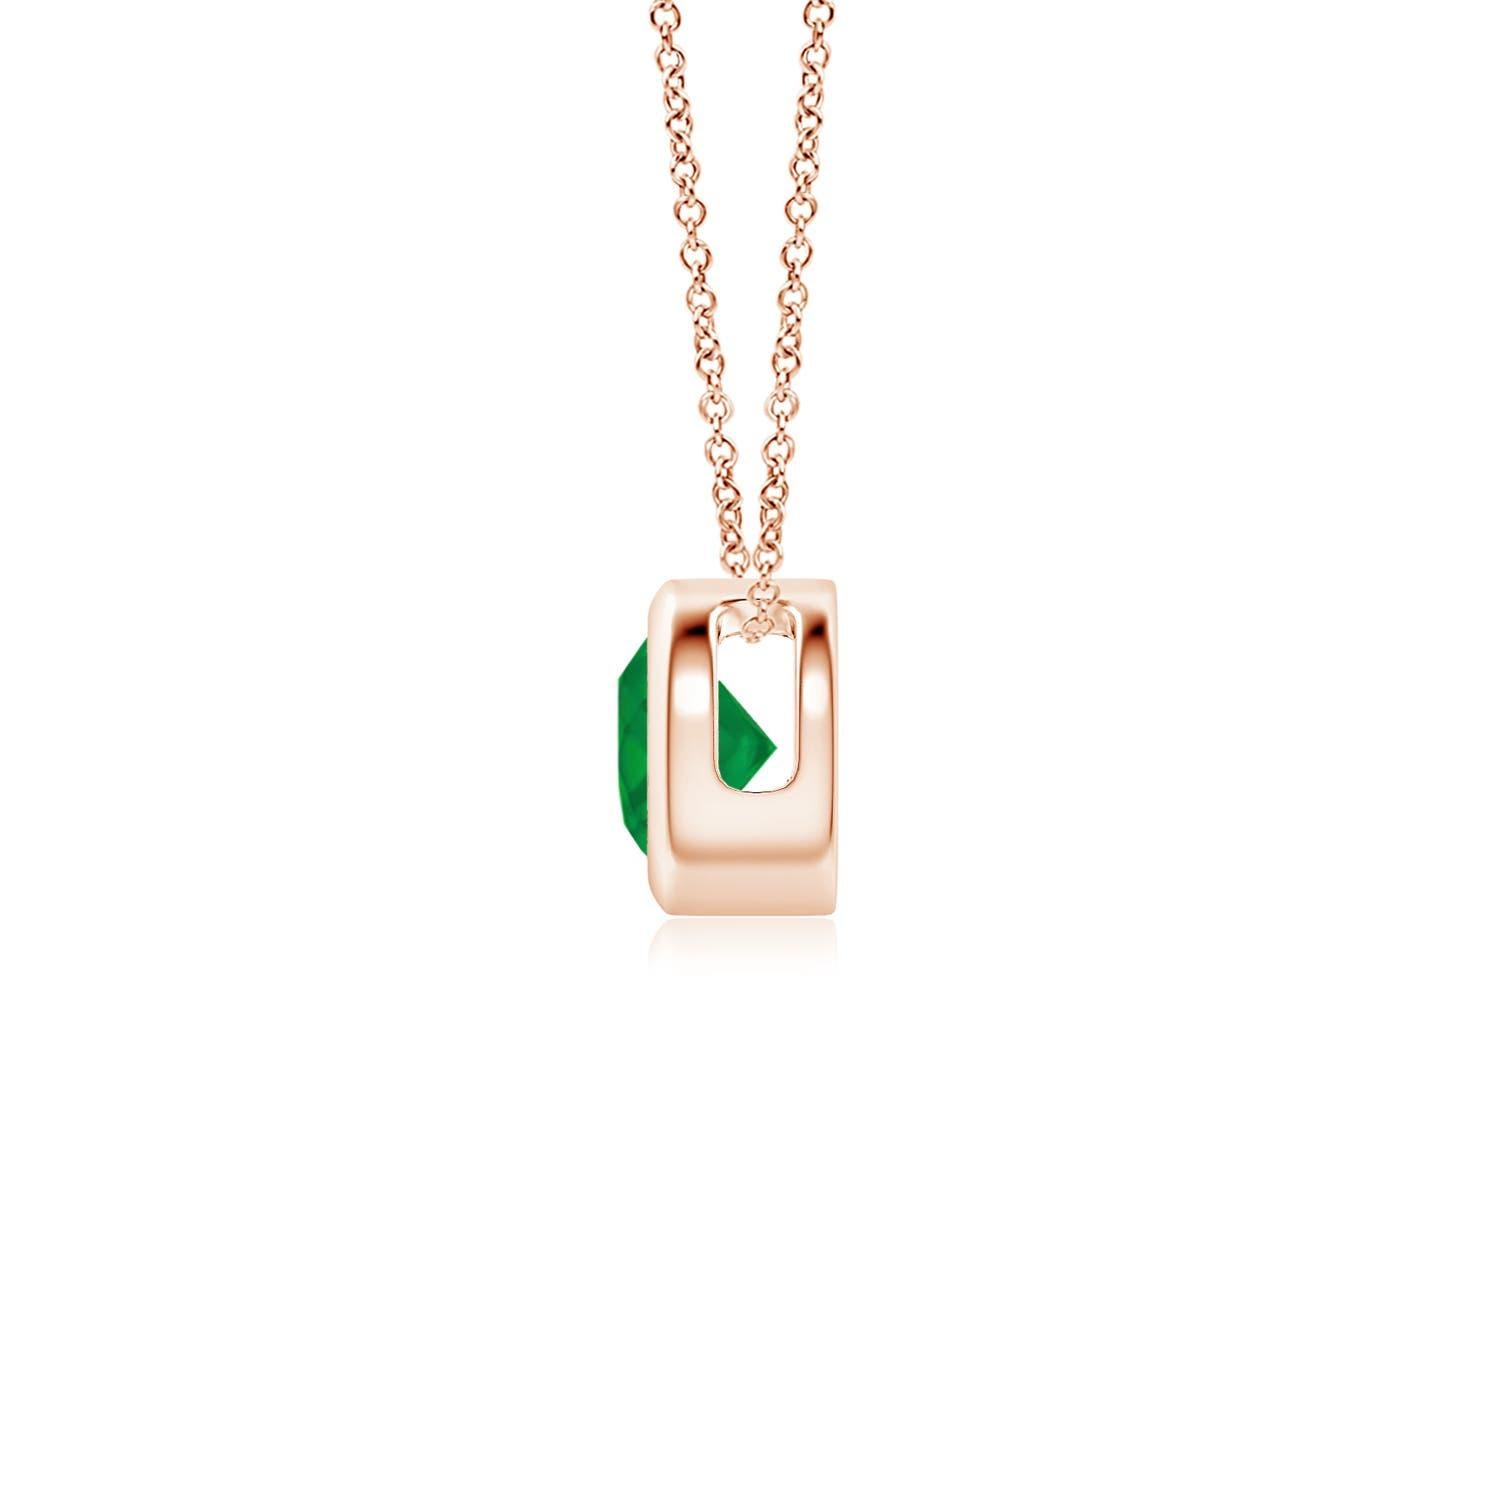 This classic solitaire emerald pendant's beautiful design makes the center stone appear like it's floating on the chain. The lush green emerald is secured in a bezel setting. Crafted in 14k rose gold, this round emerald pendant is simple yet